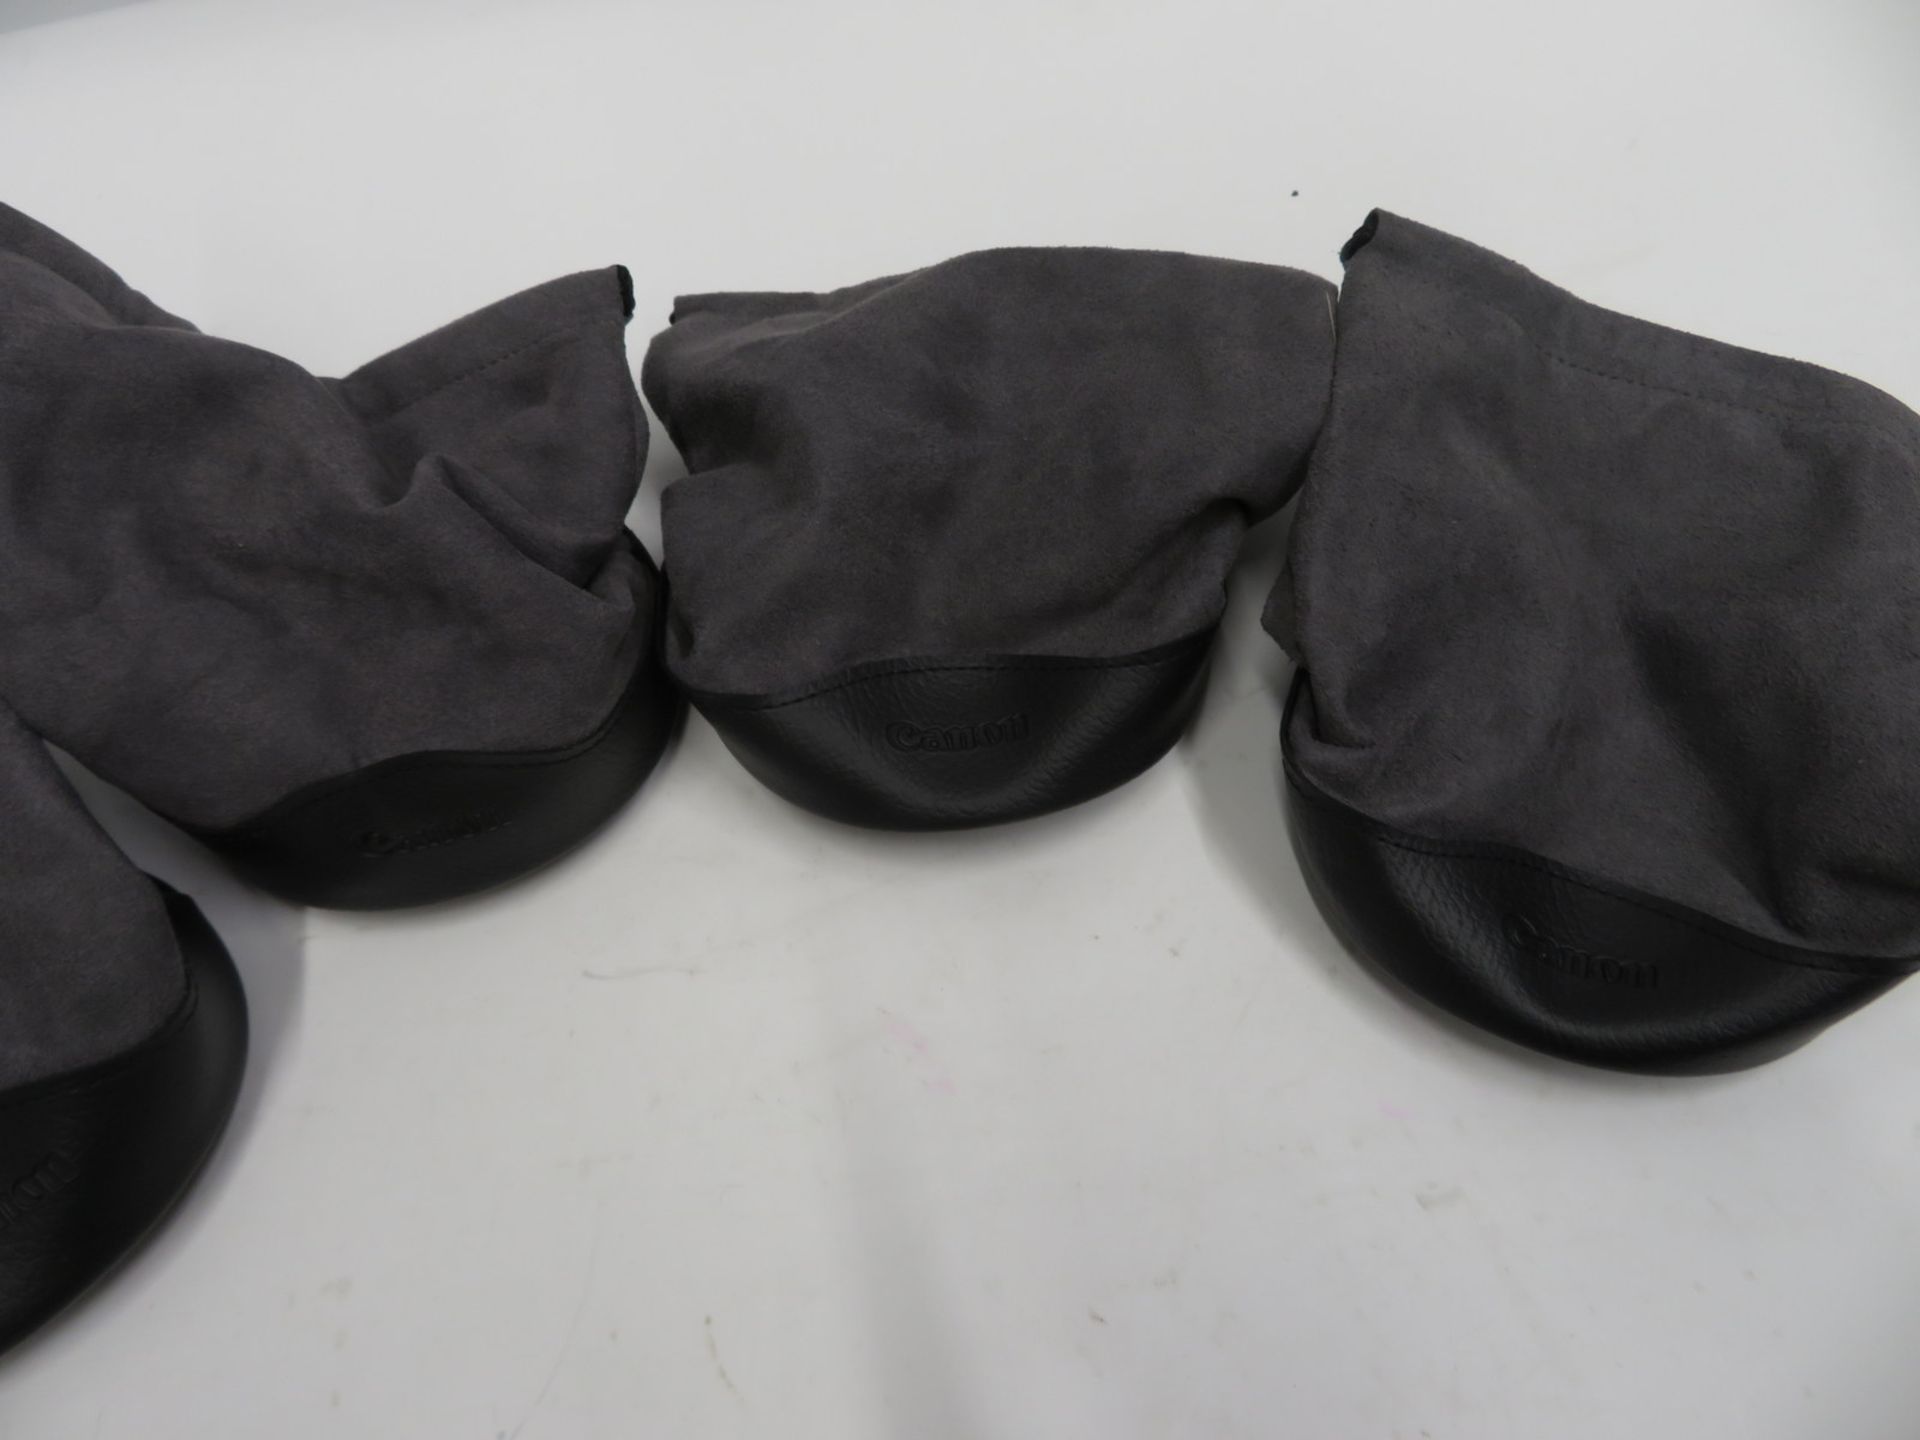 4x suede Canon lens pouches - Image 3 of 3